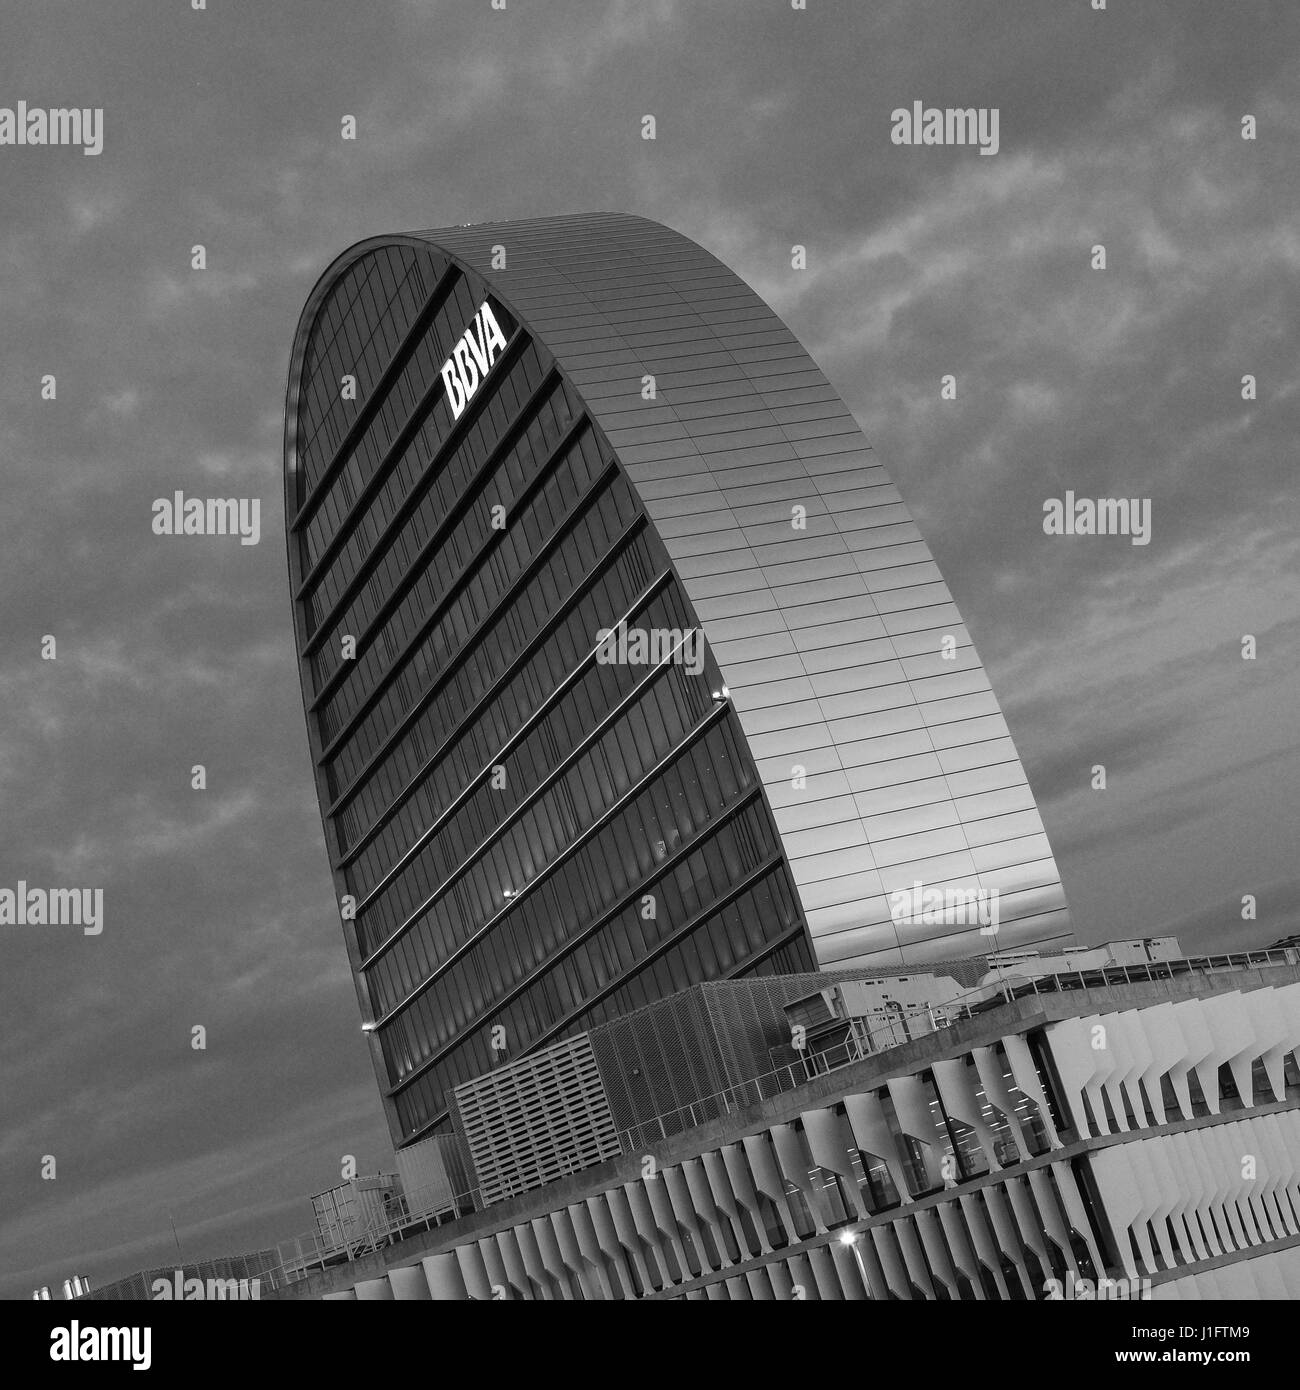 Building La Vela in Madrid. Seat of the bank BBVA, is 93 meters high, 19 floors and an irregular elliptical tower was designed by Swiss architecture firm Herzog & De Meuron, winner of the Pritzker Prize  Featuring: Atmosphere Where: Madrid, Spain When: 20 Mar 2017 Credit: Oscar Gonzalez/WENN.com Stock Photo